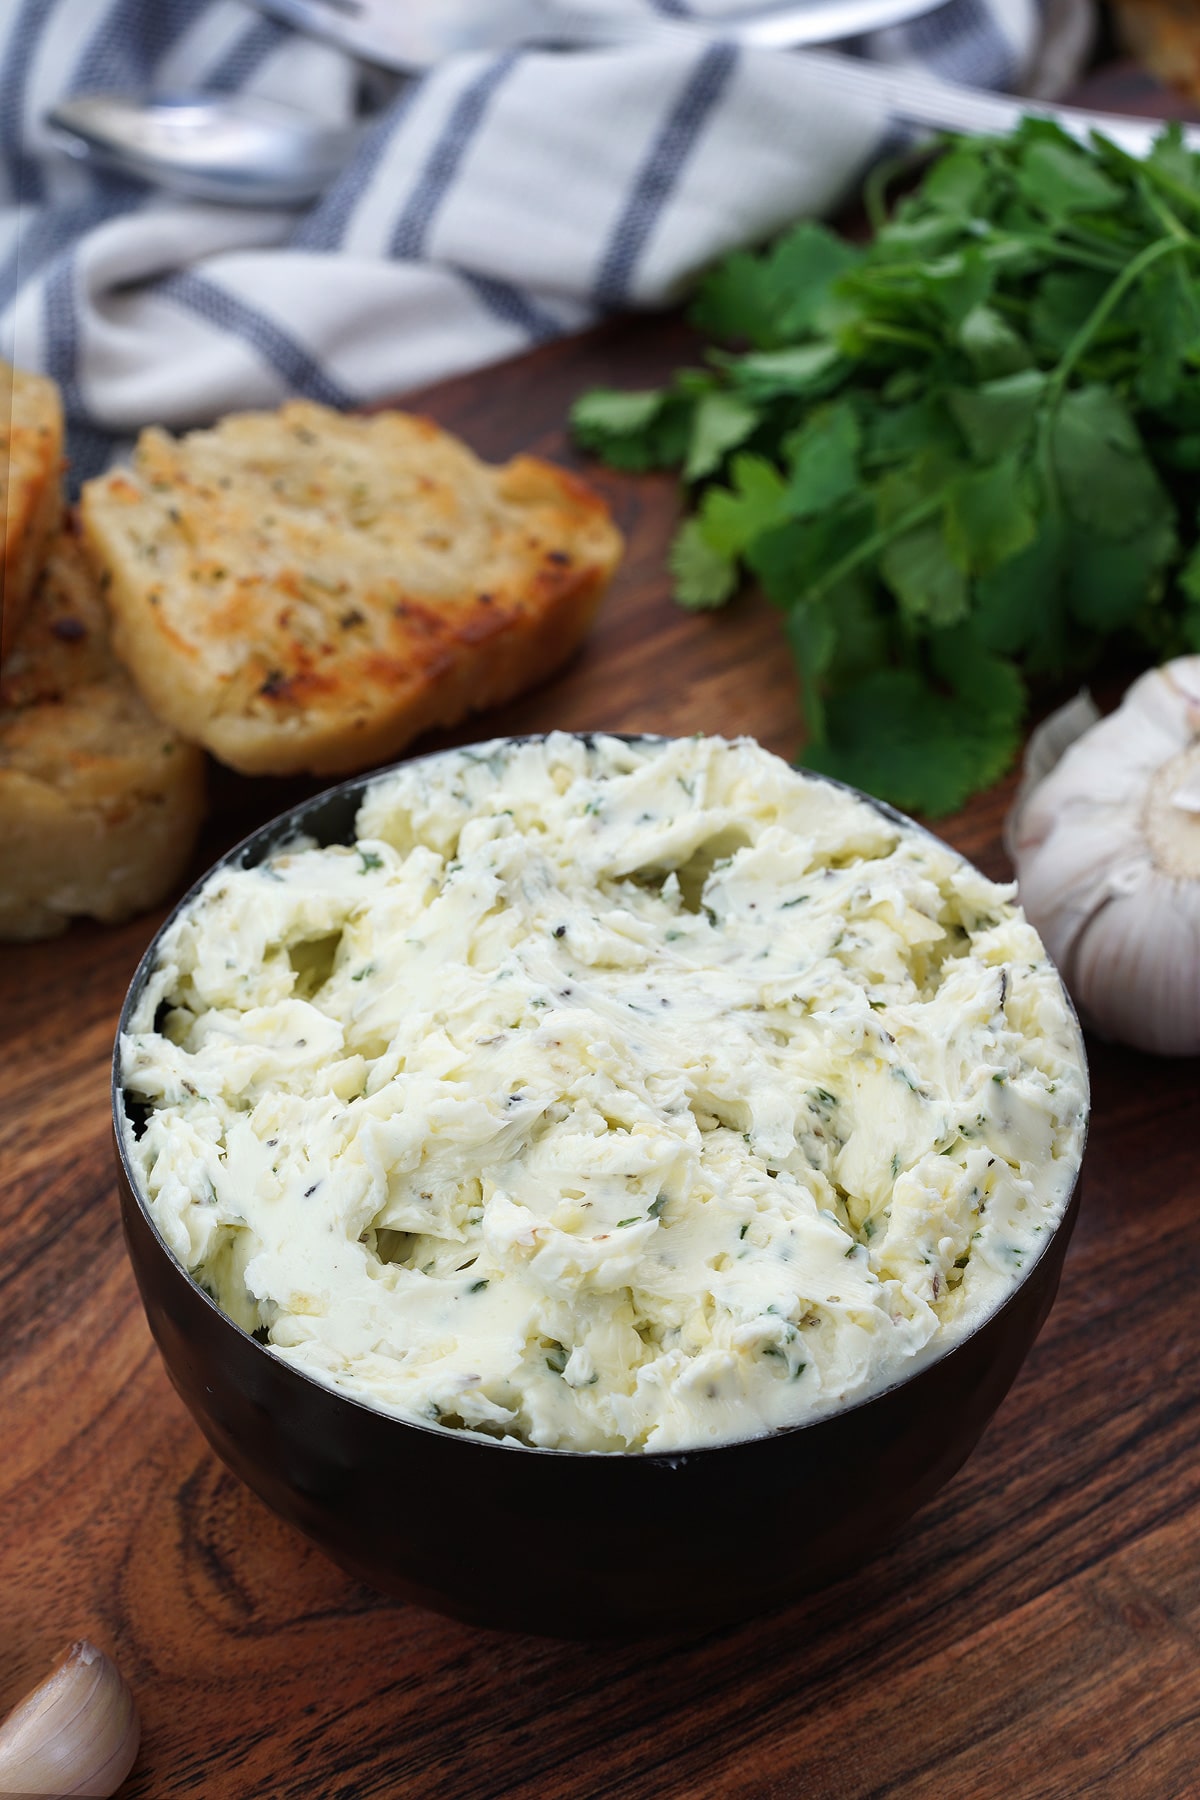 Garlic butter in a cup